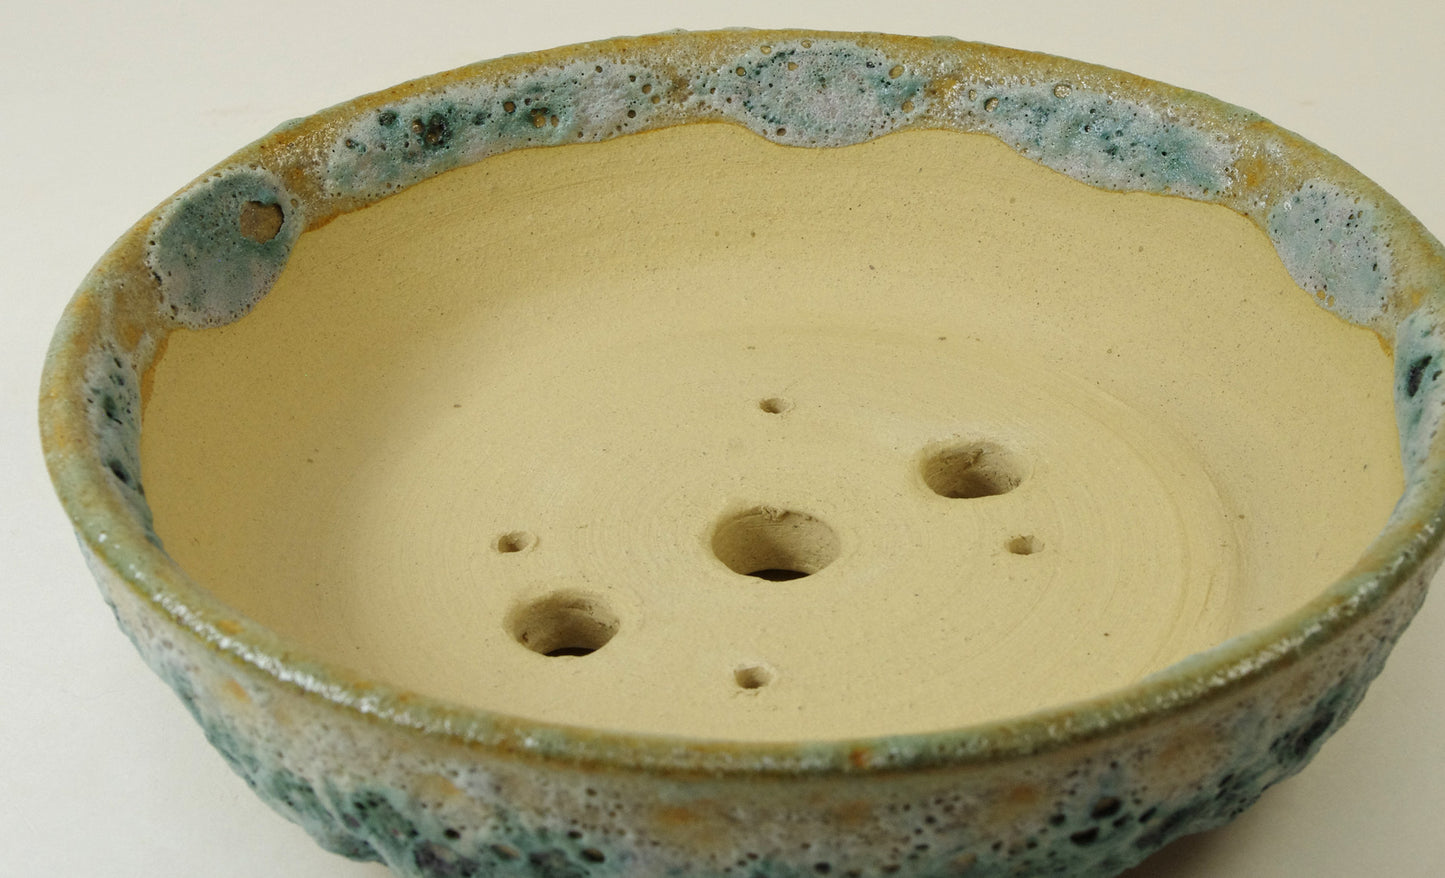 2104 Lava Crater Glazed Hand Thrown Stoneware Bonsai Pot, Extra Wire Holes, Greens, Tans 7 5/8 x 2 1/8